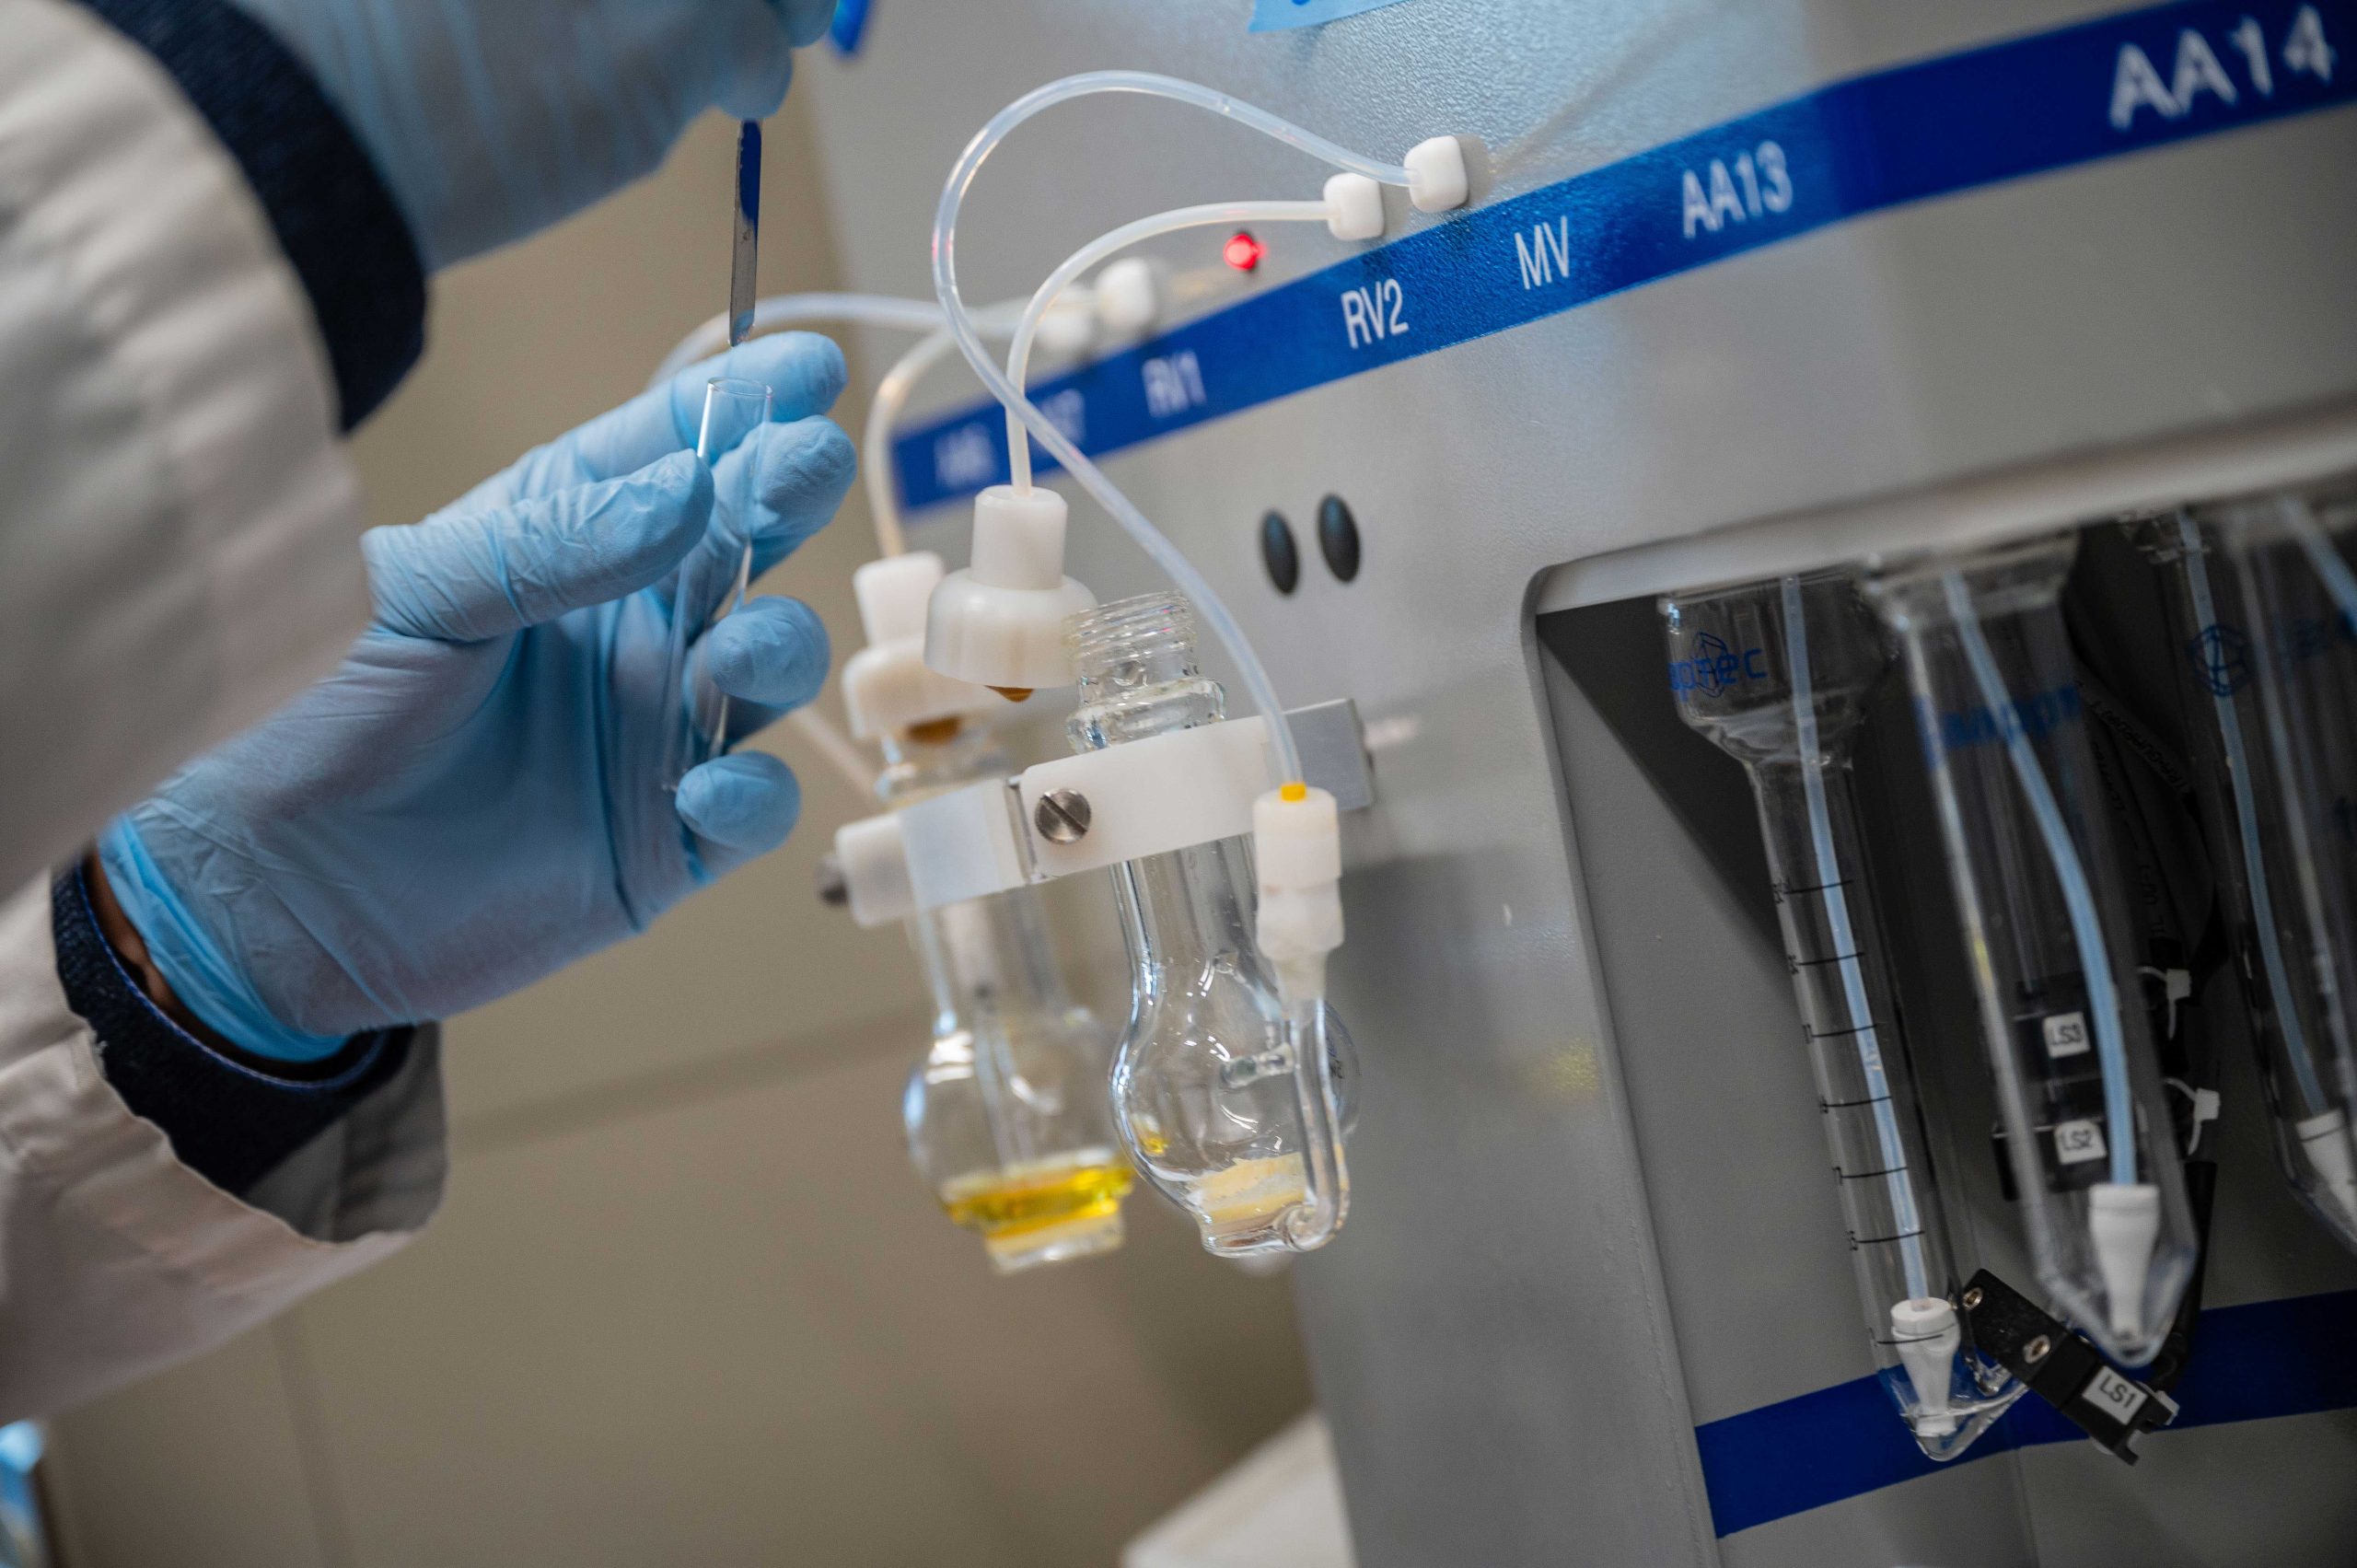 A researcher in Dr. François Bénard’s lab uses lab equipment to synthesize cancer-targeting peptides, a core component of radiopharmceuticals drugs.